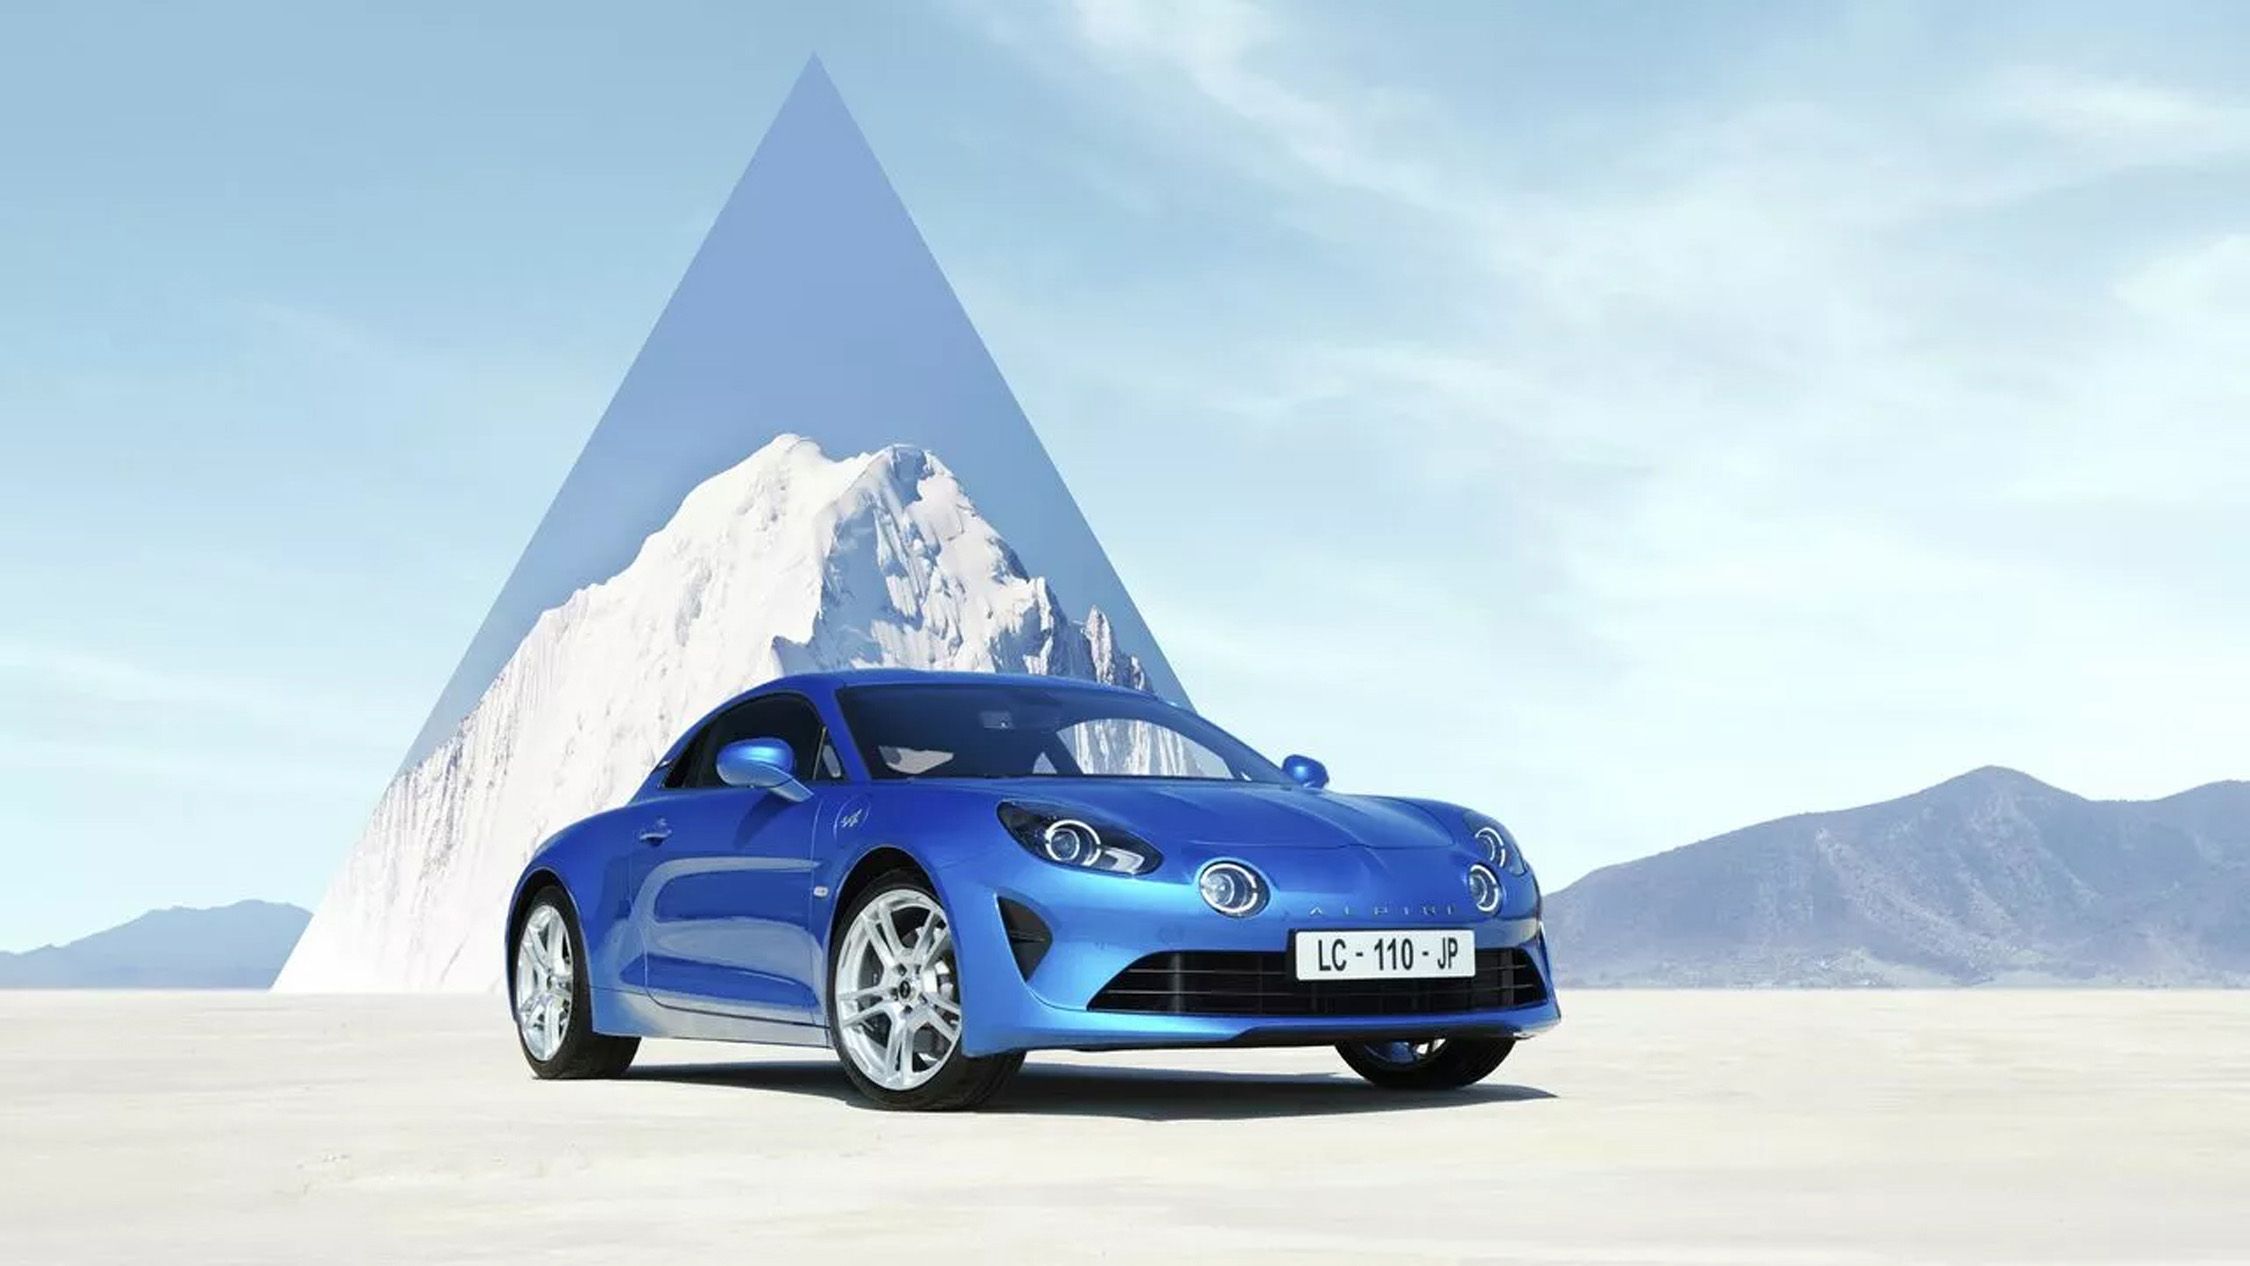 Bad News: The Awesome New Alpine A110 Isn't Coming to the US